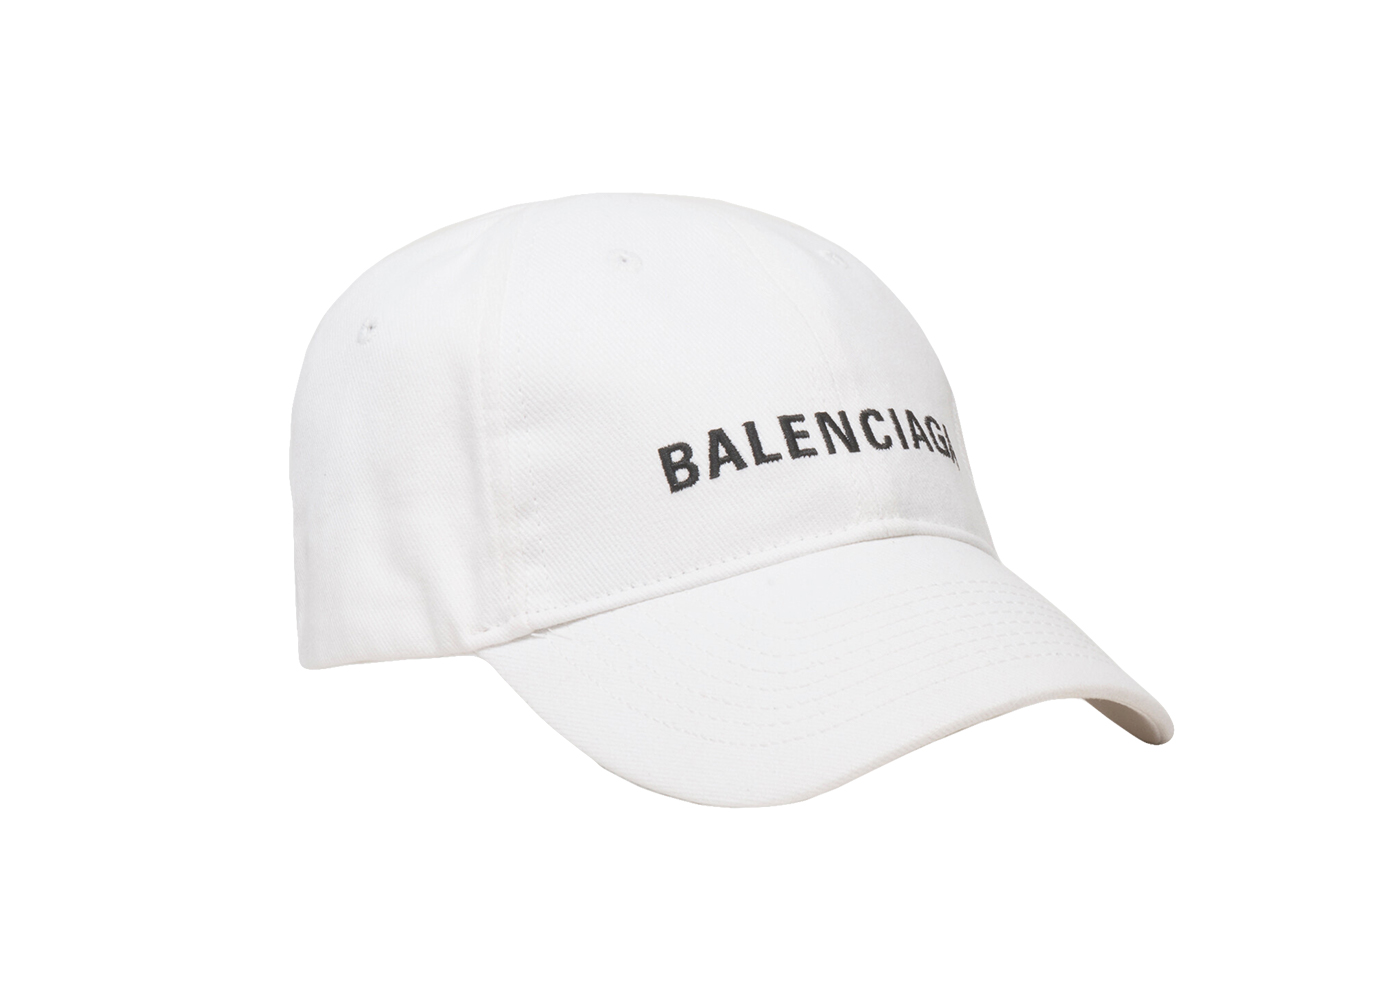 Balenciaga Embroidery Baseball Cap White Mens Fashion Watches   Accessories Caps  Hats on Carousell